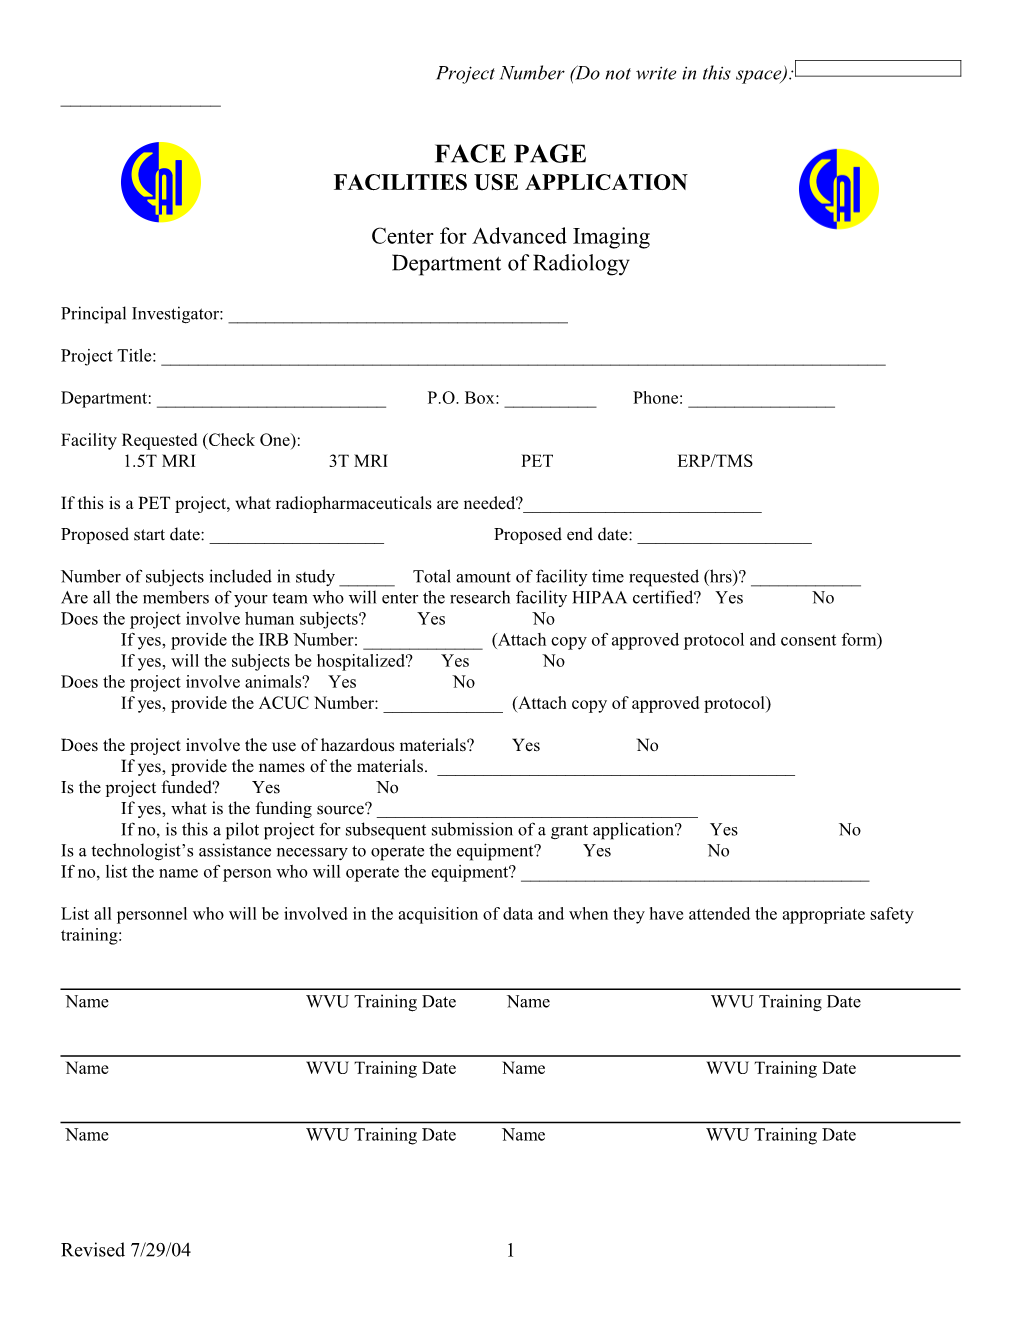 Application for Use of Facilities